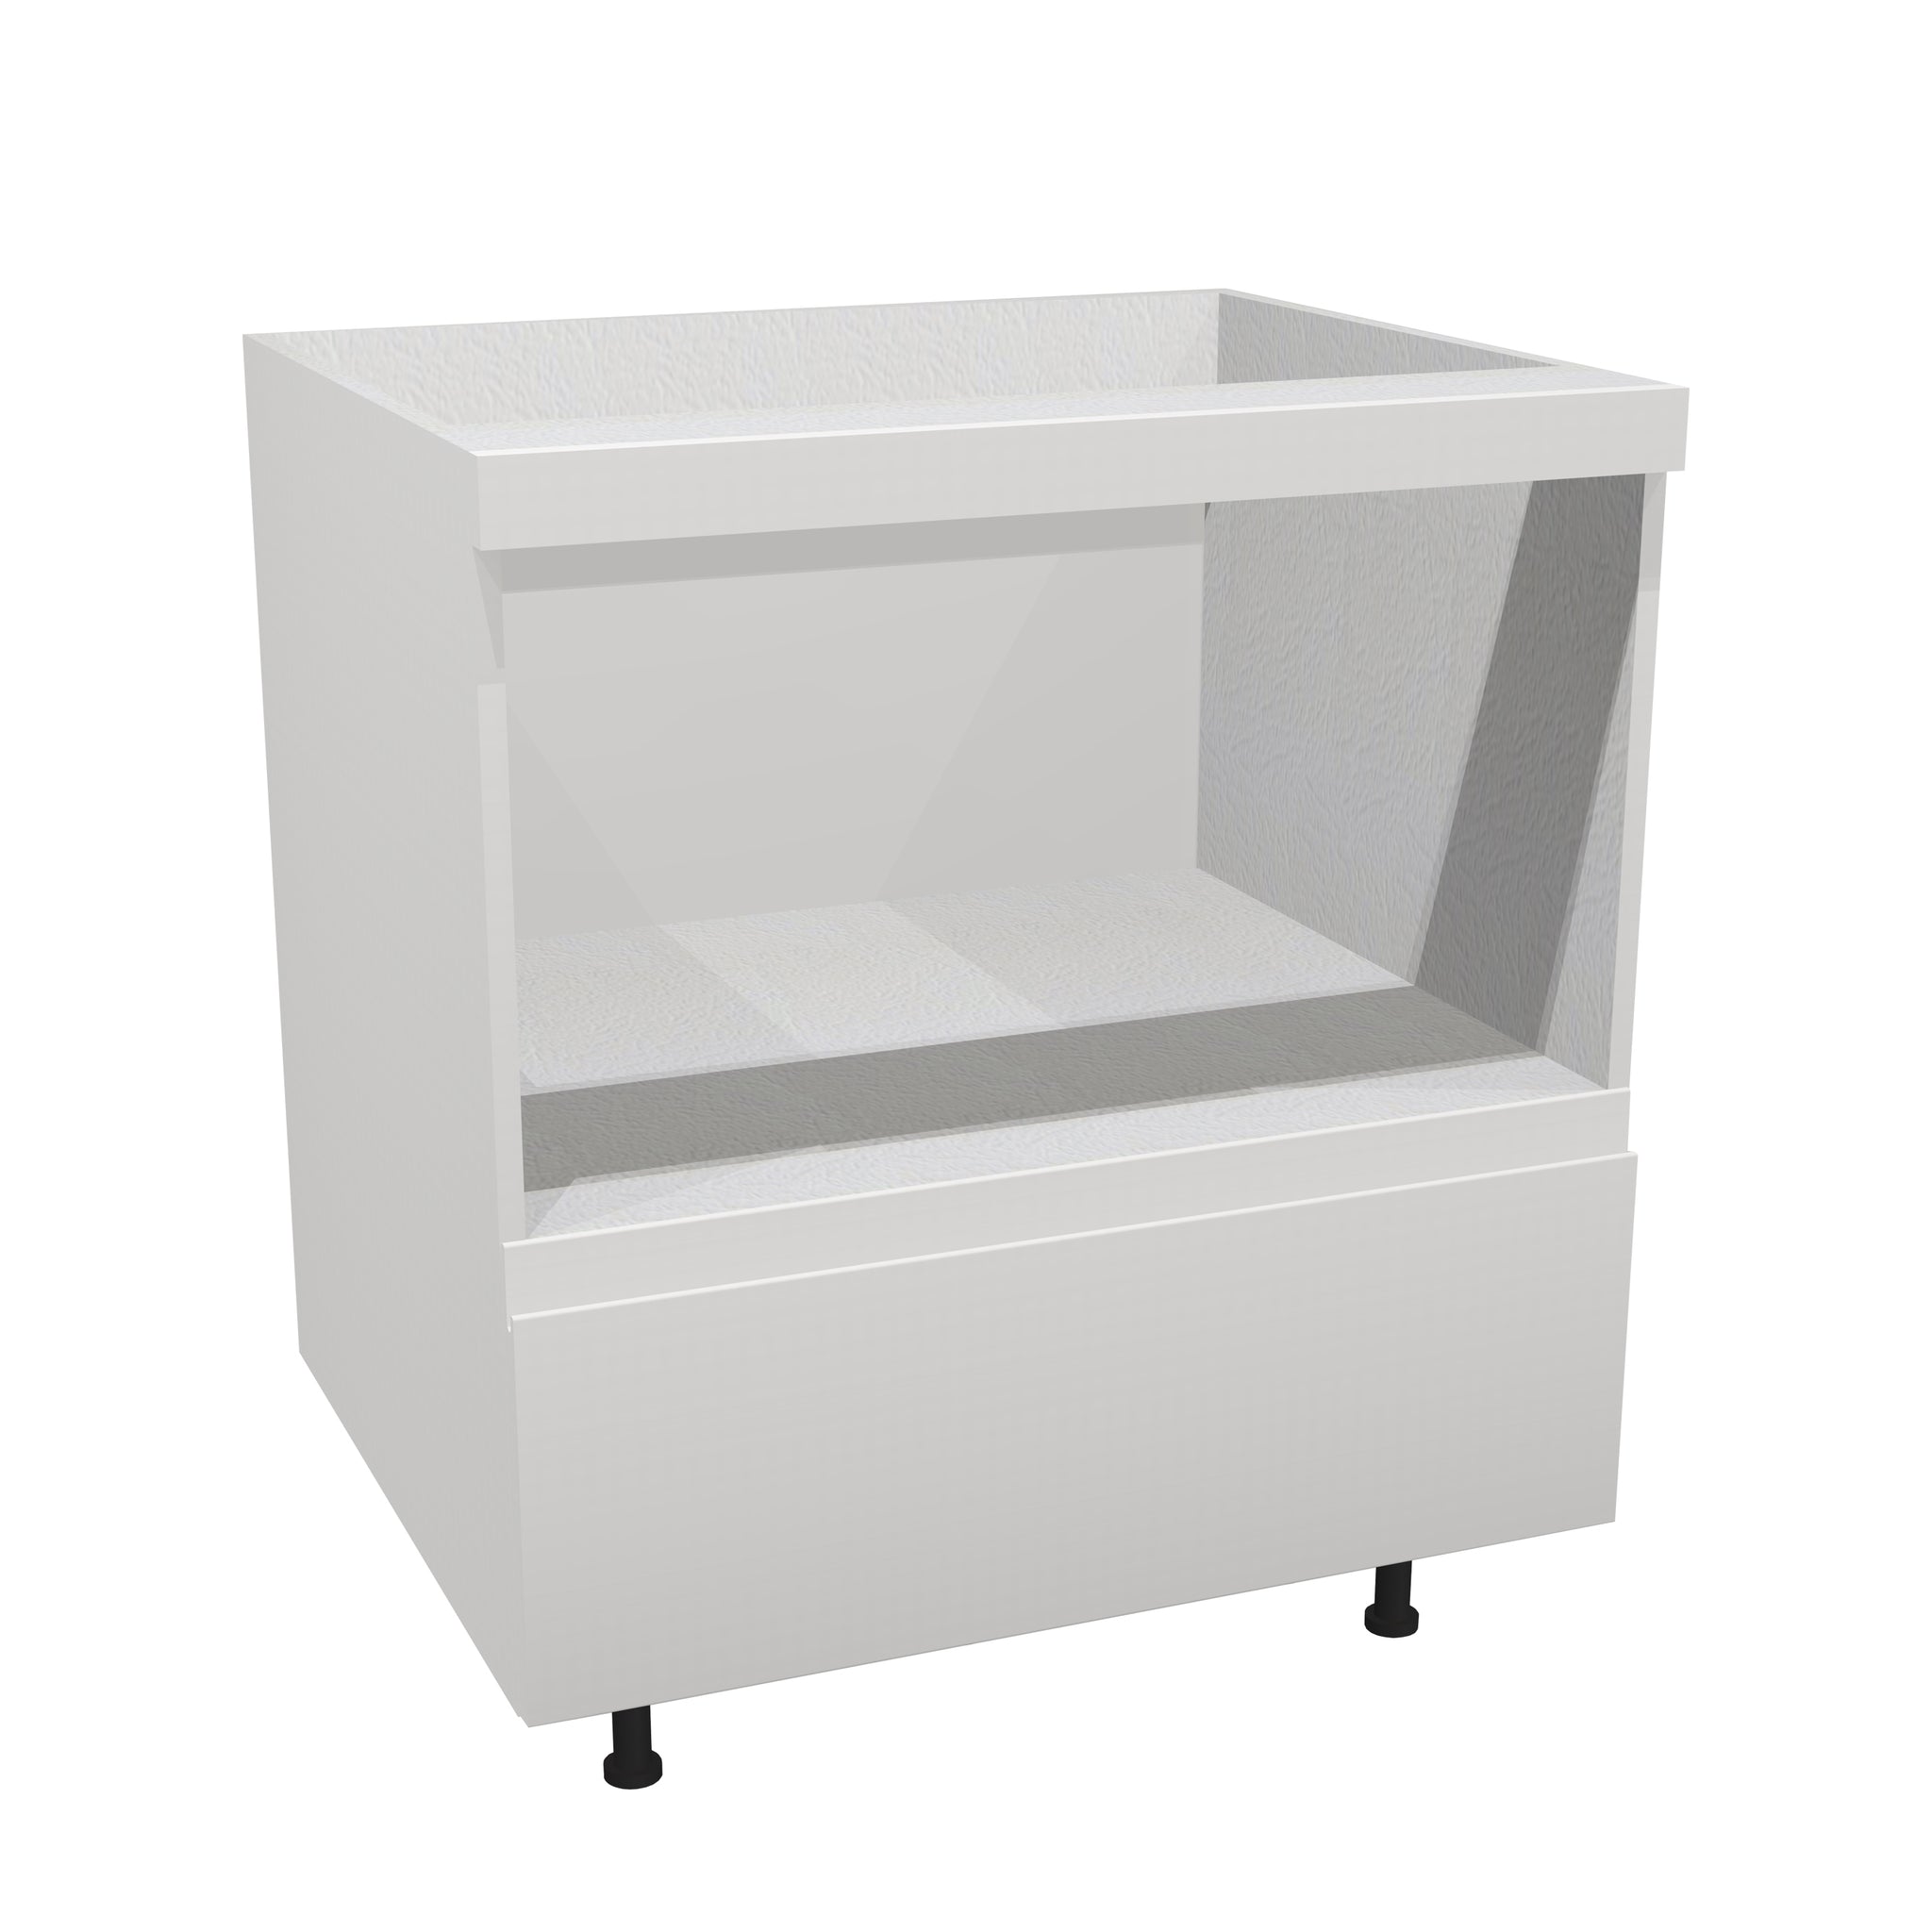 RTA - Lacquer White - Base Microwave Cabinet | 33"W x 30"H x 23.8"D